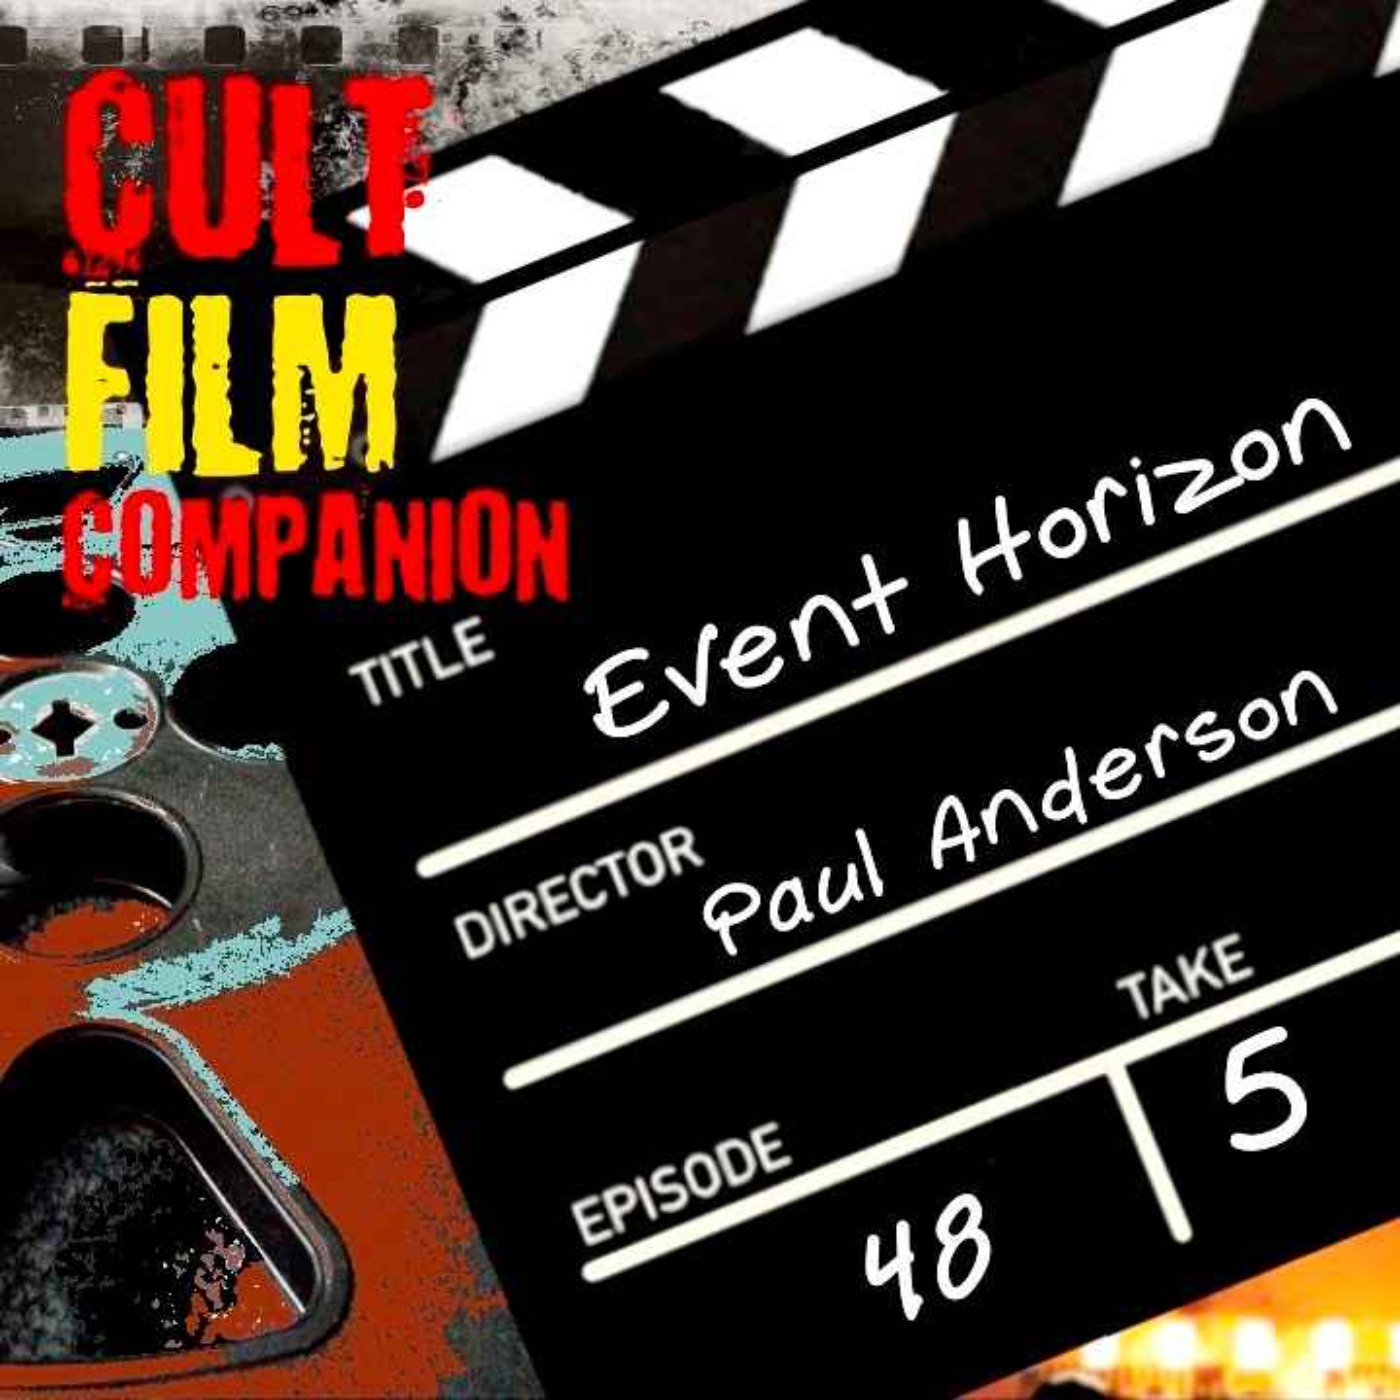 Ep. 48 Event Horizon directed by Paul Anderson